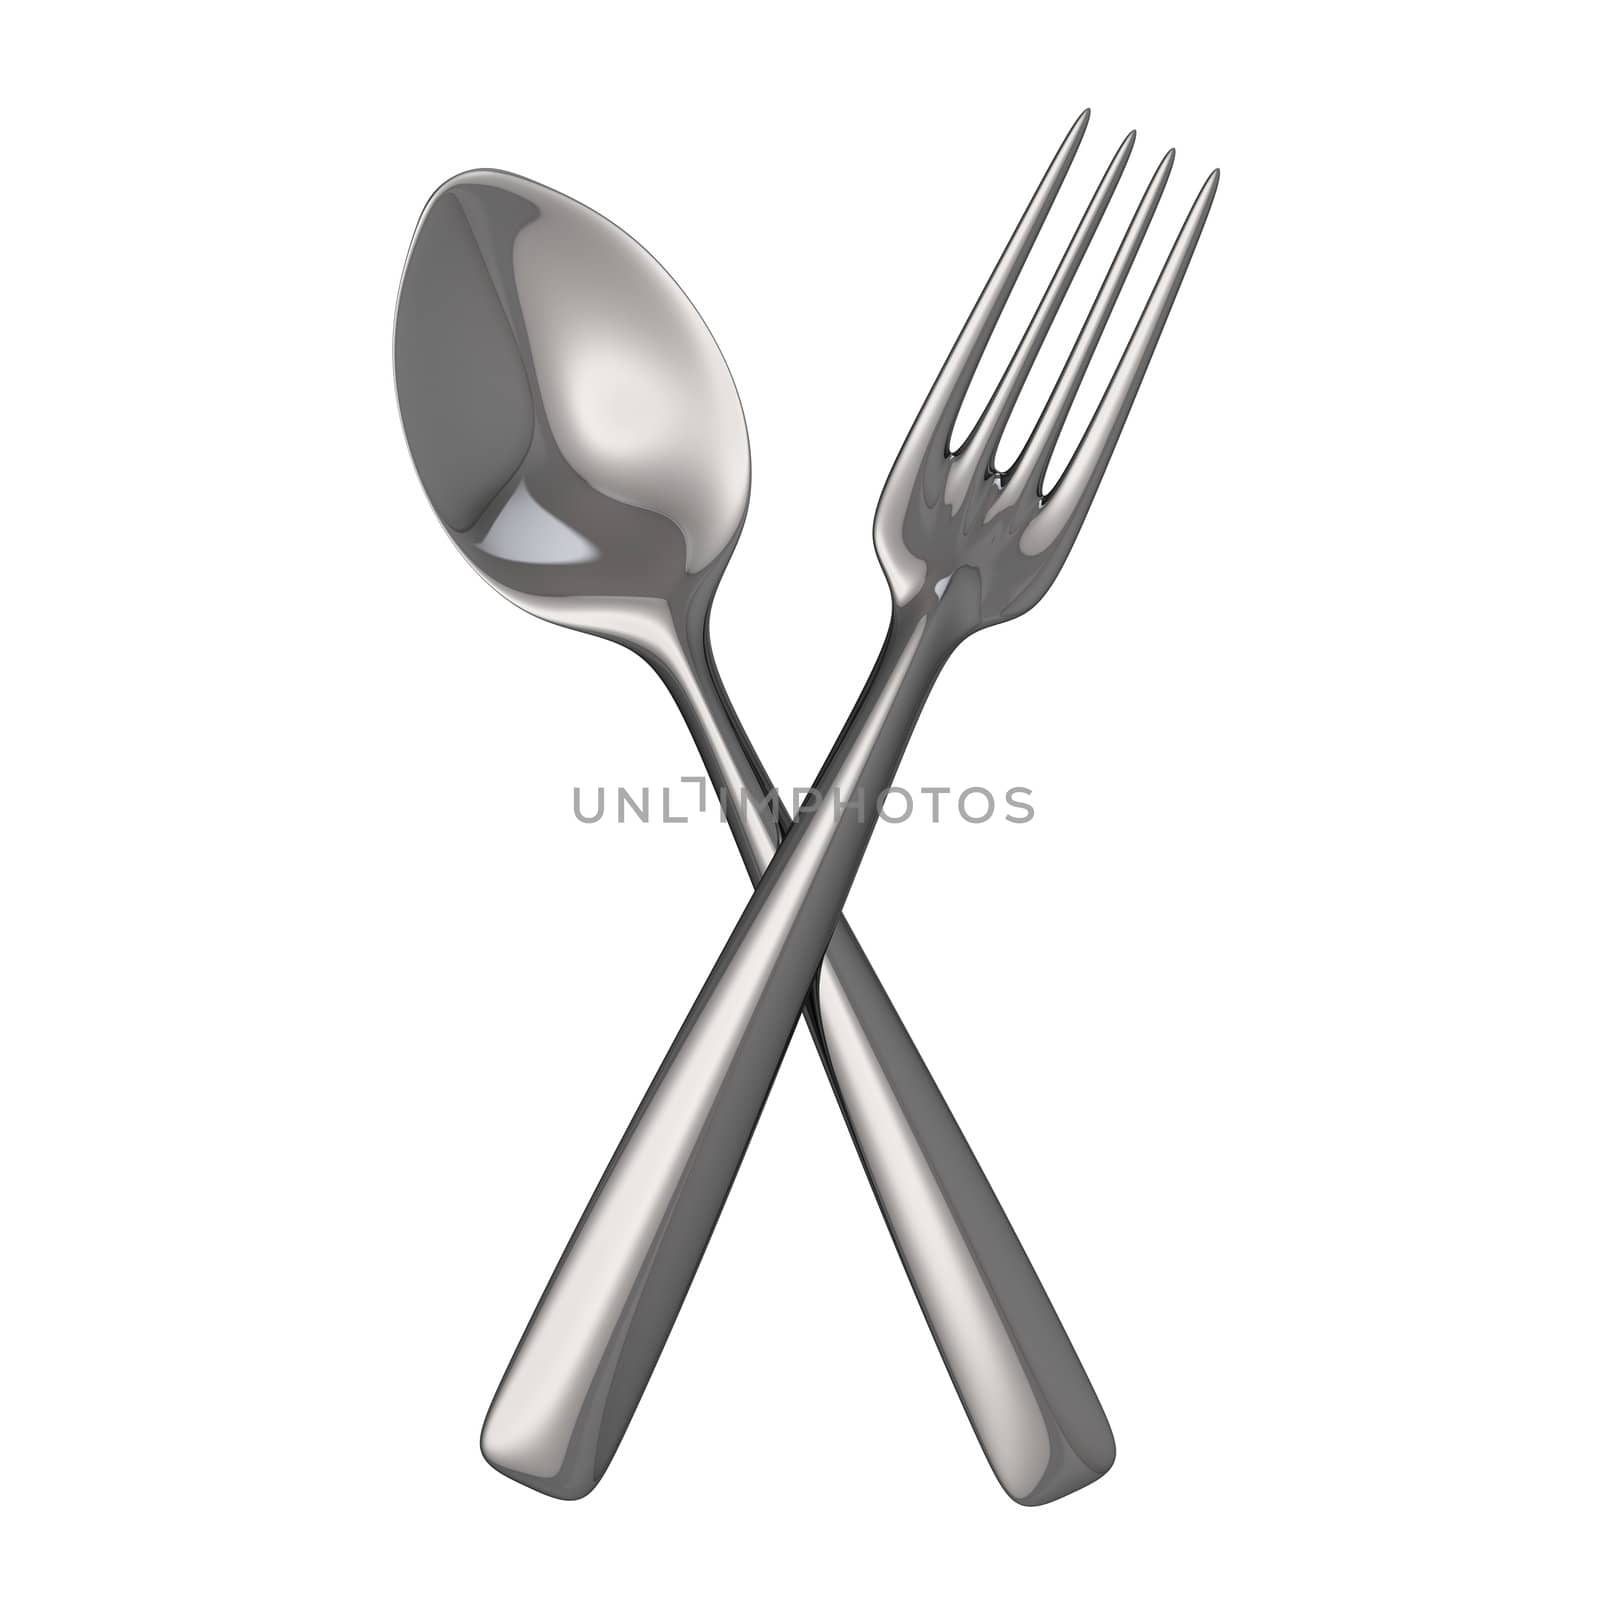 Crossed spoon and fork by timbrk